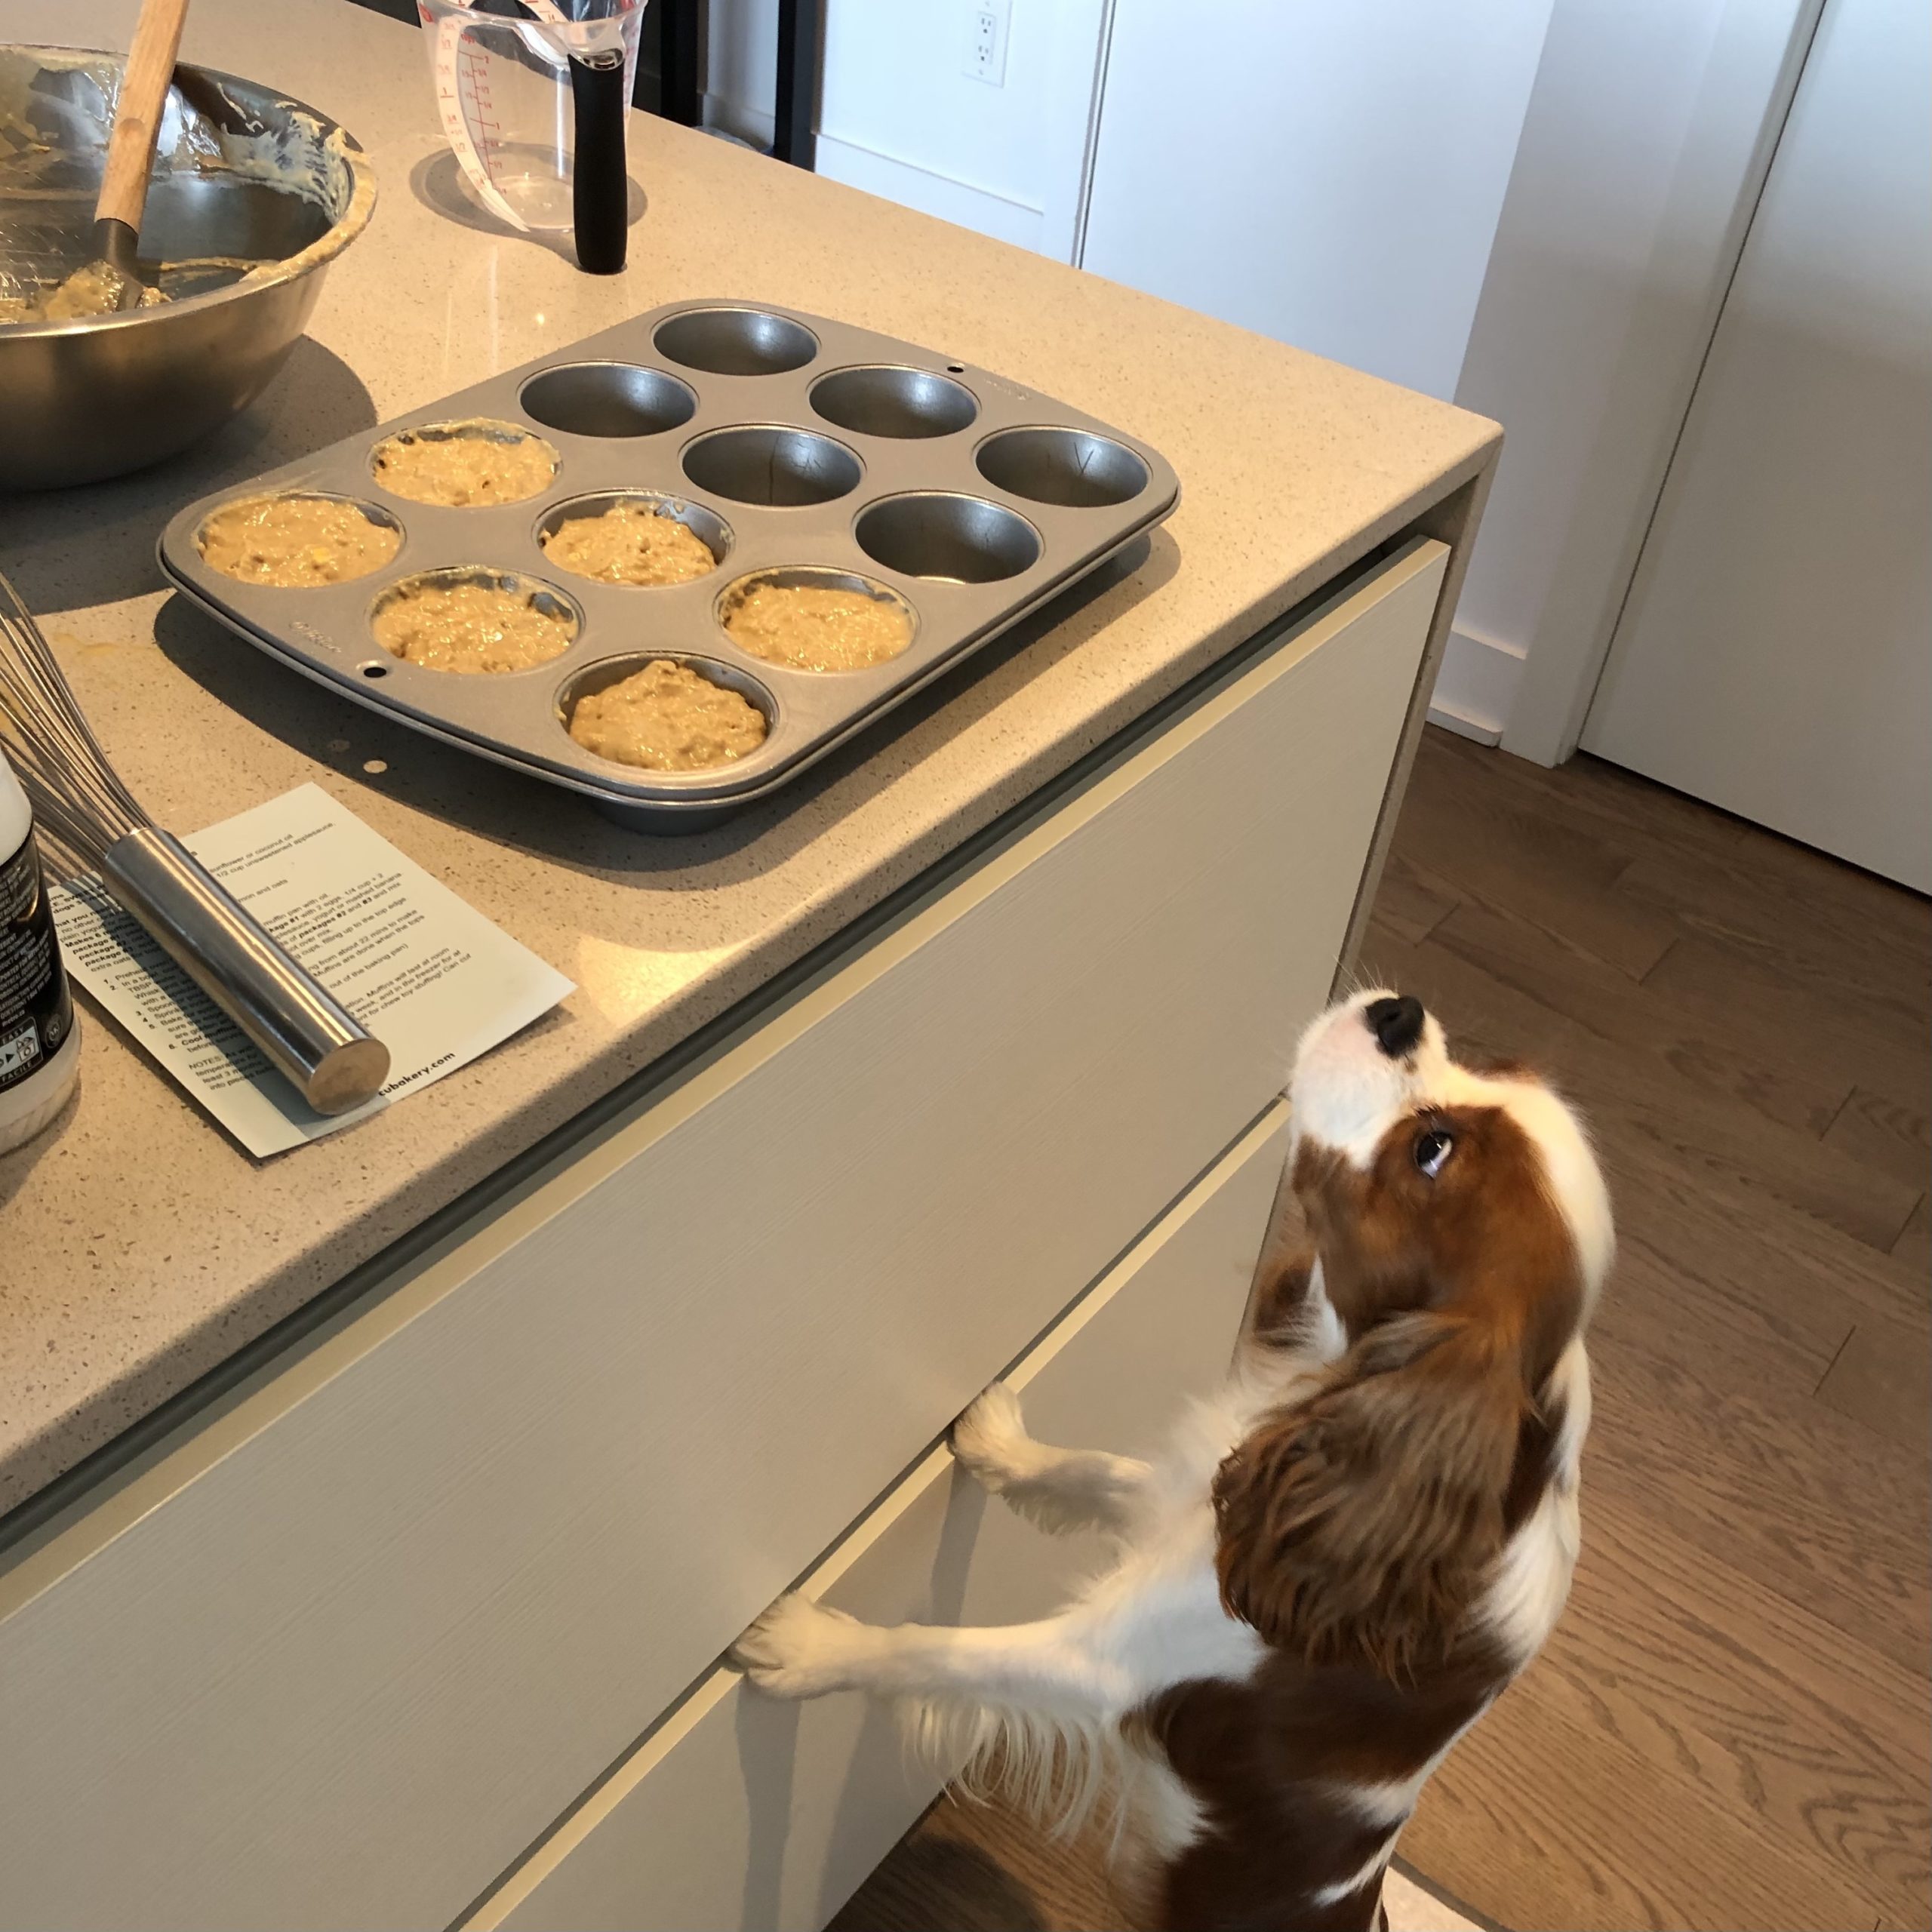 BAKING FOR YOUR DOG